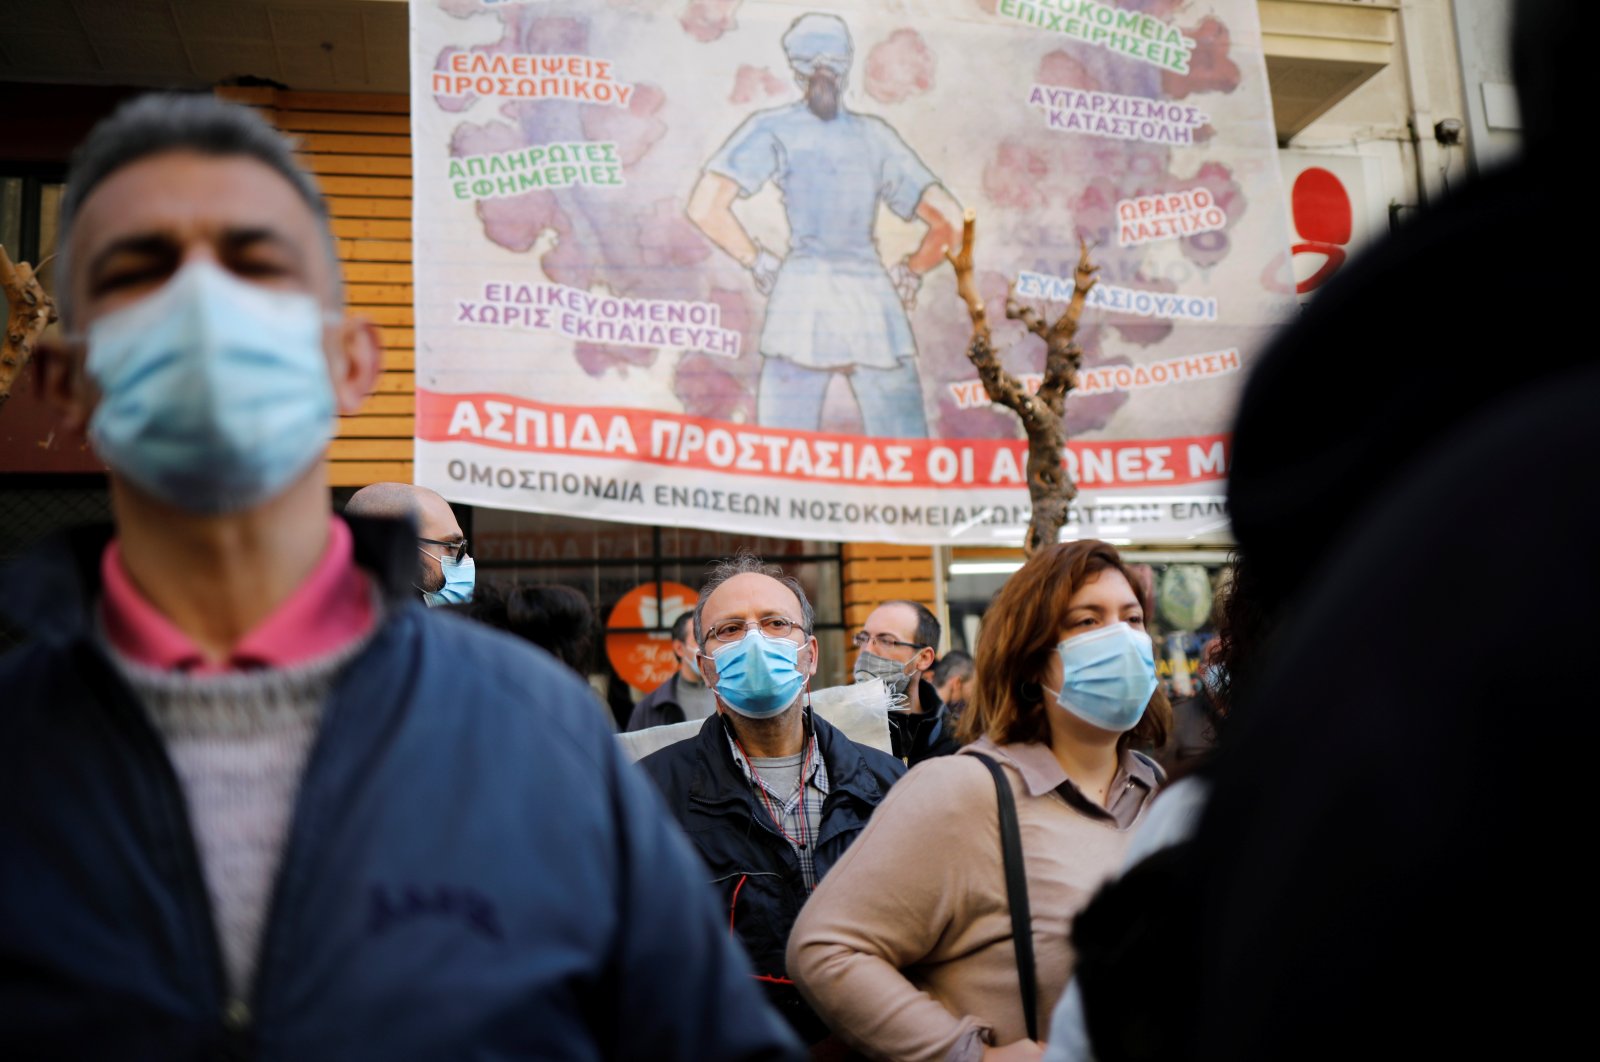 Greek hospital doctors and staff take part in a demonstration against a lack of intensive care units at public hospitals, amidst the spread of the coronavirus disease (COVID-19) in Athens, Greece, Feb. 23, 2021. (Reuters Photo)